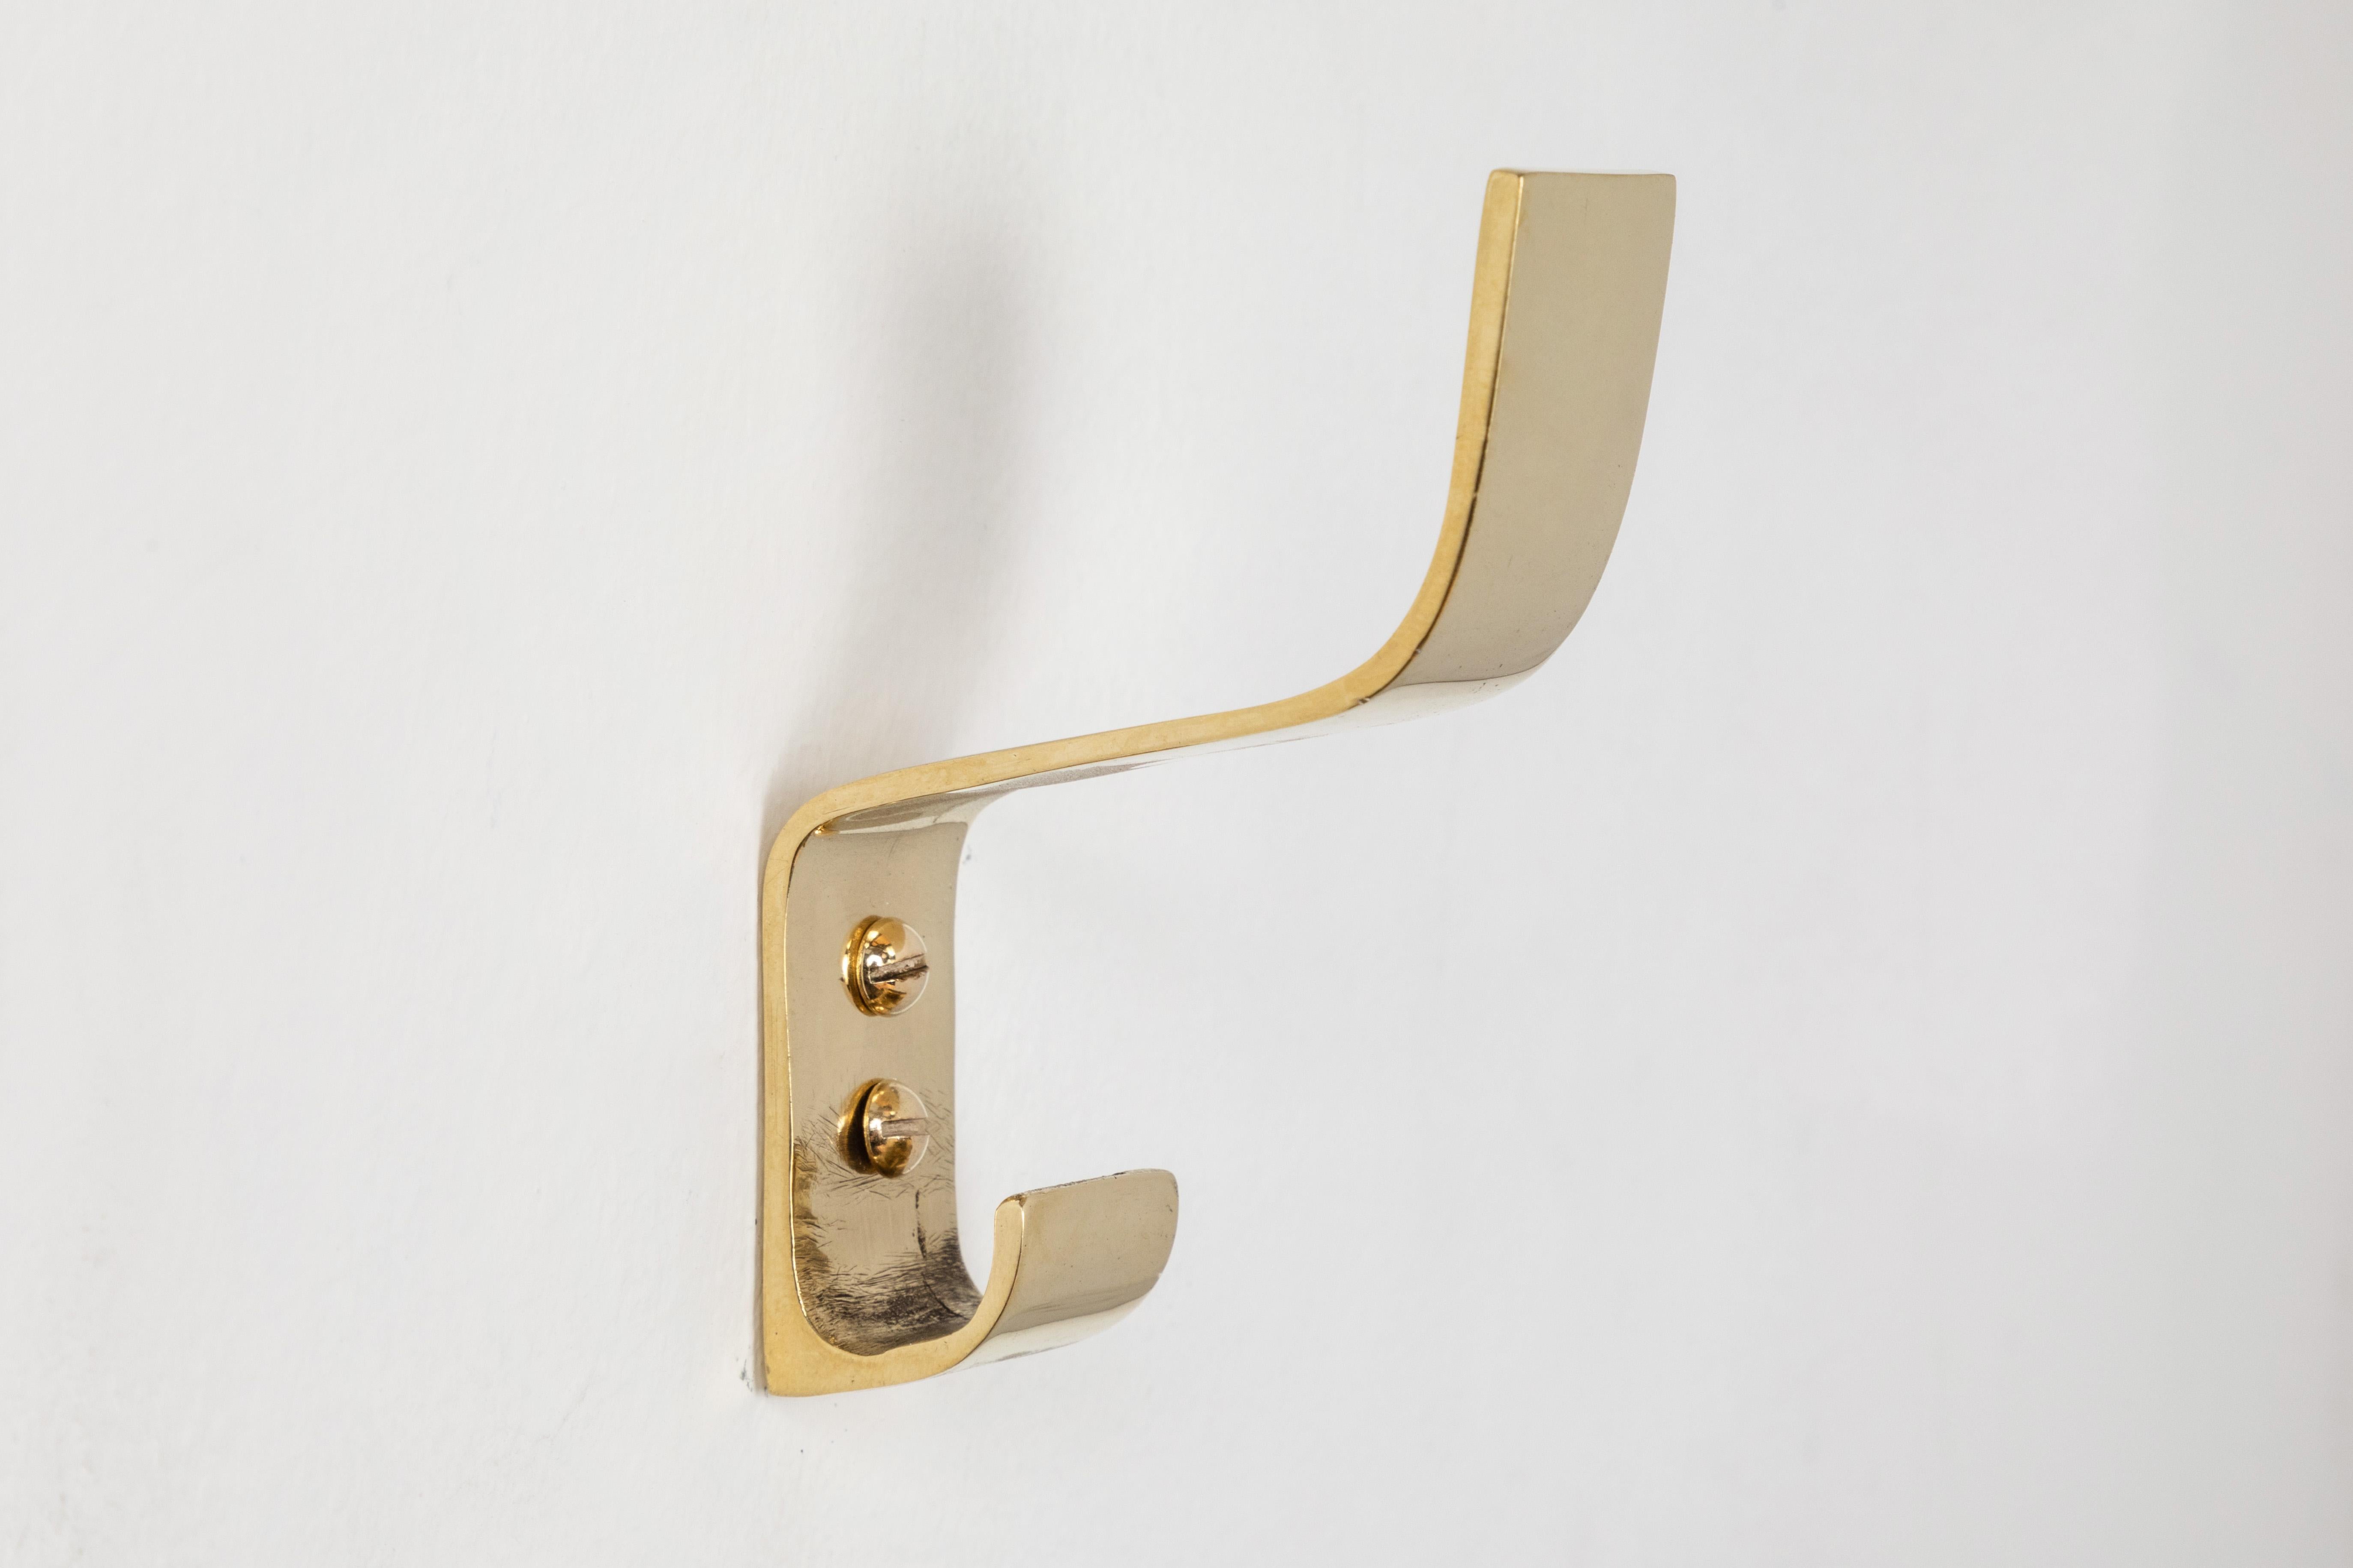 Carl Auböck model #5261 brass hook. Designed in the 1950s, this versatile and Minimalist Viennese hook is executed in polished brass by Werkstätte Carl Auböck, Austria. 

Produced by Carl Auböck IV in the original Auböck workshop in the 7th district